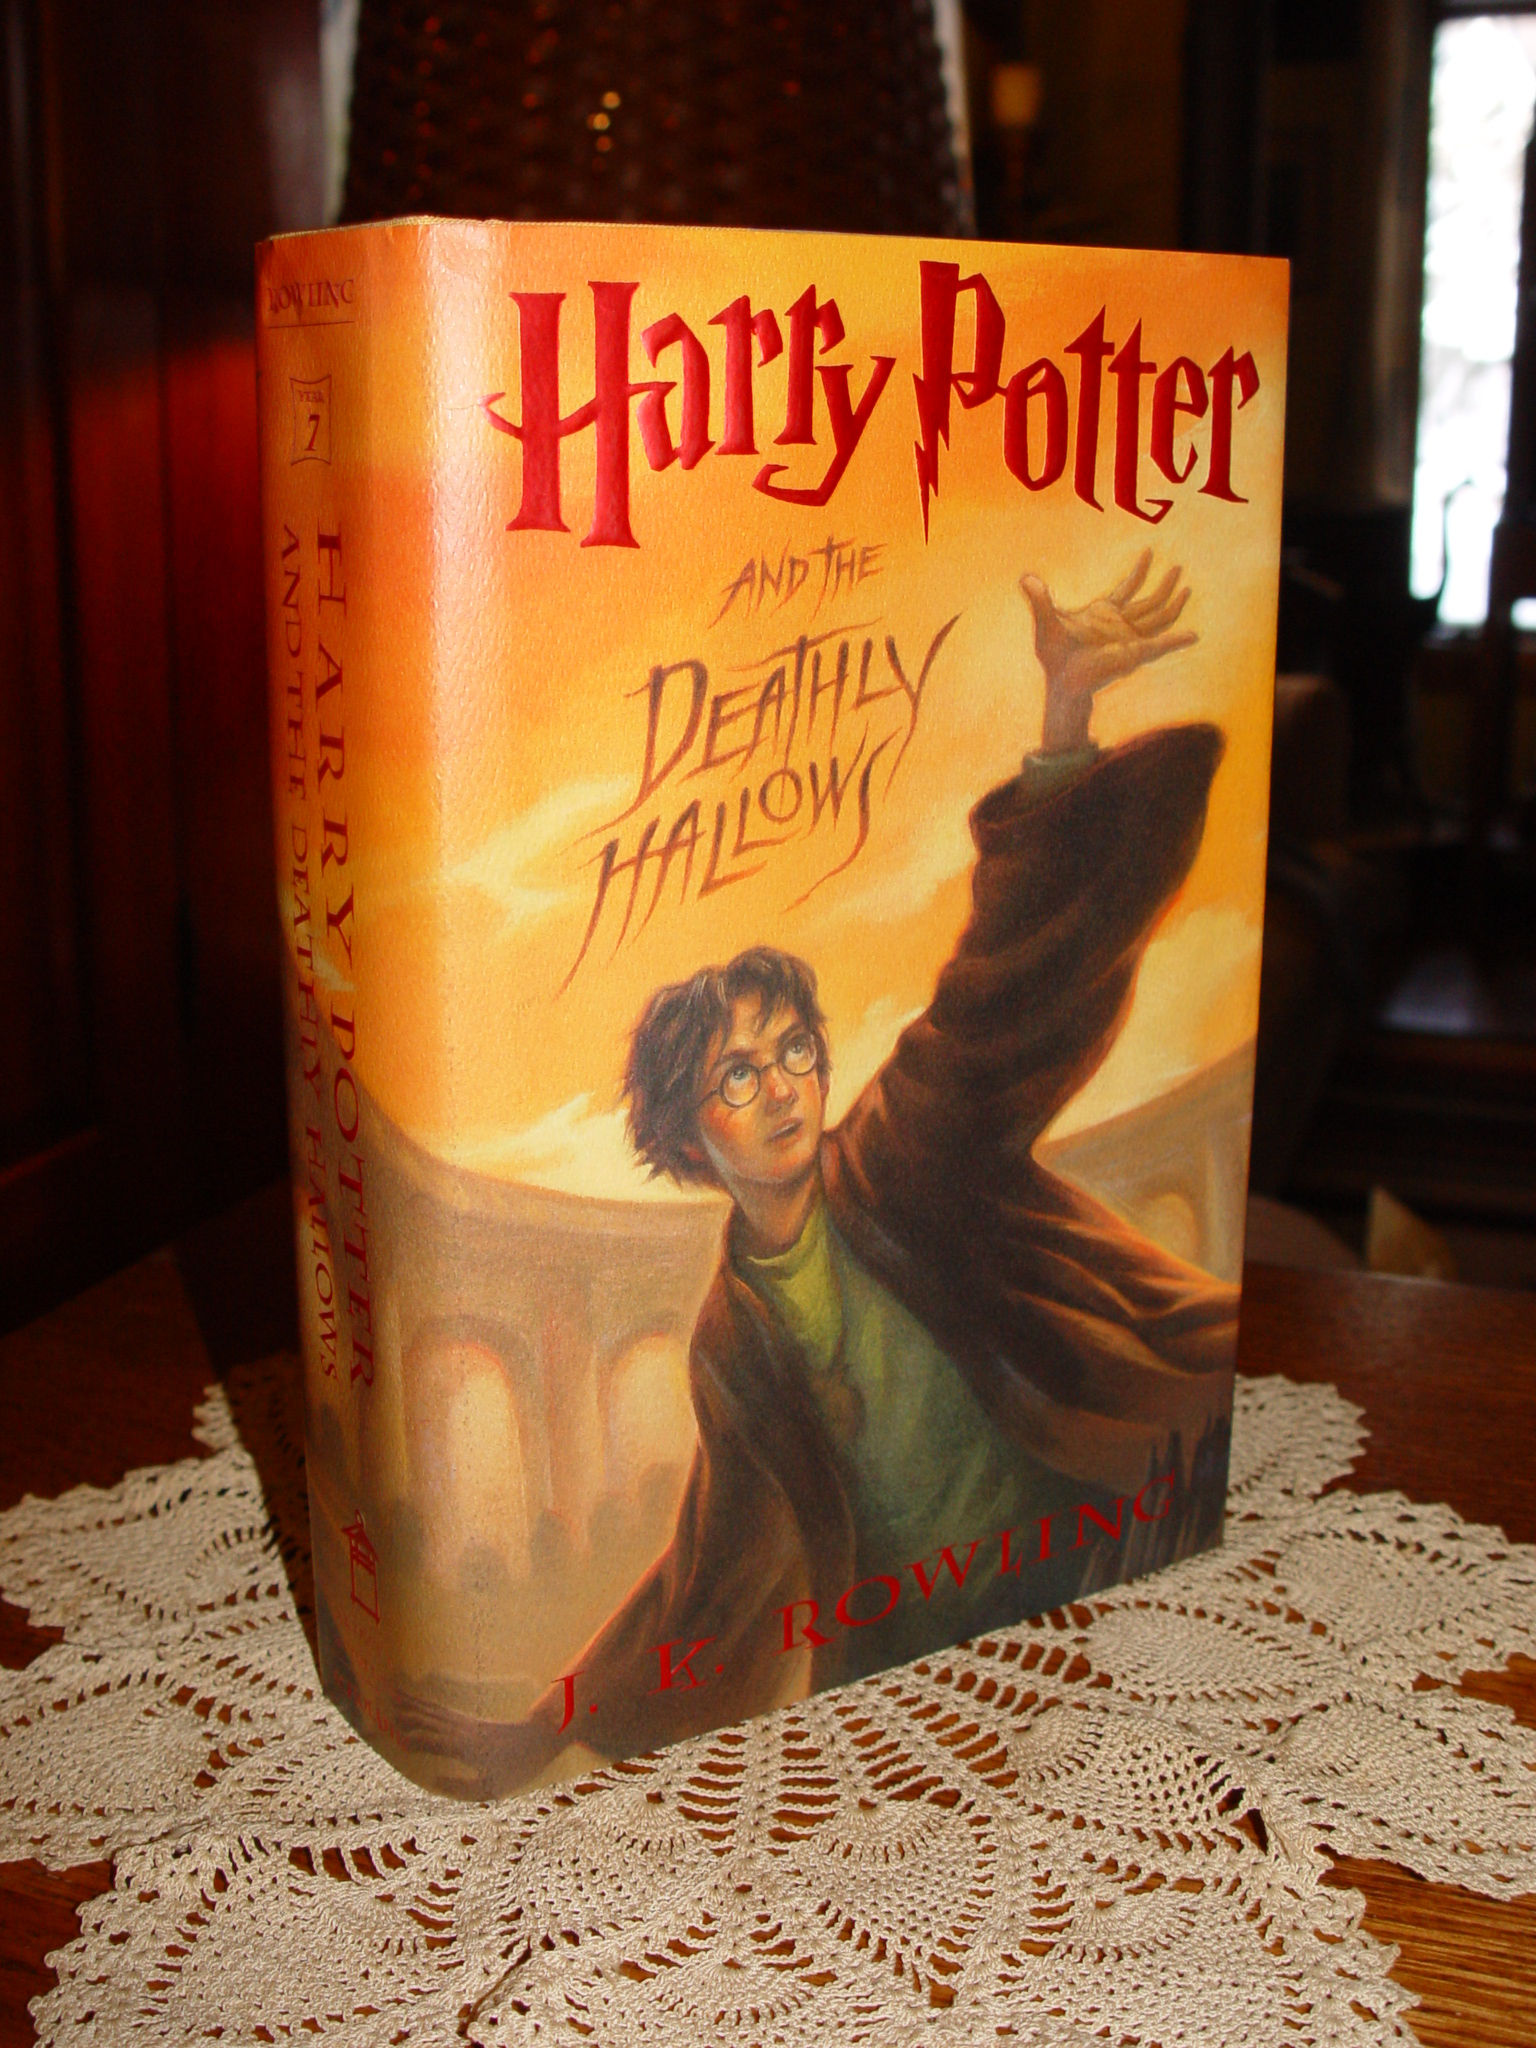 Harry Potter and the Deathly Hallows (Book
                        7) 2007 J.K. Rowling